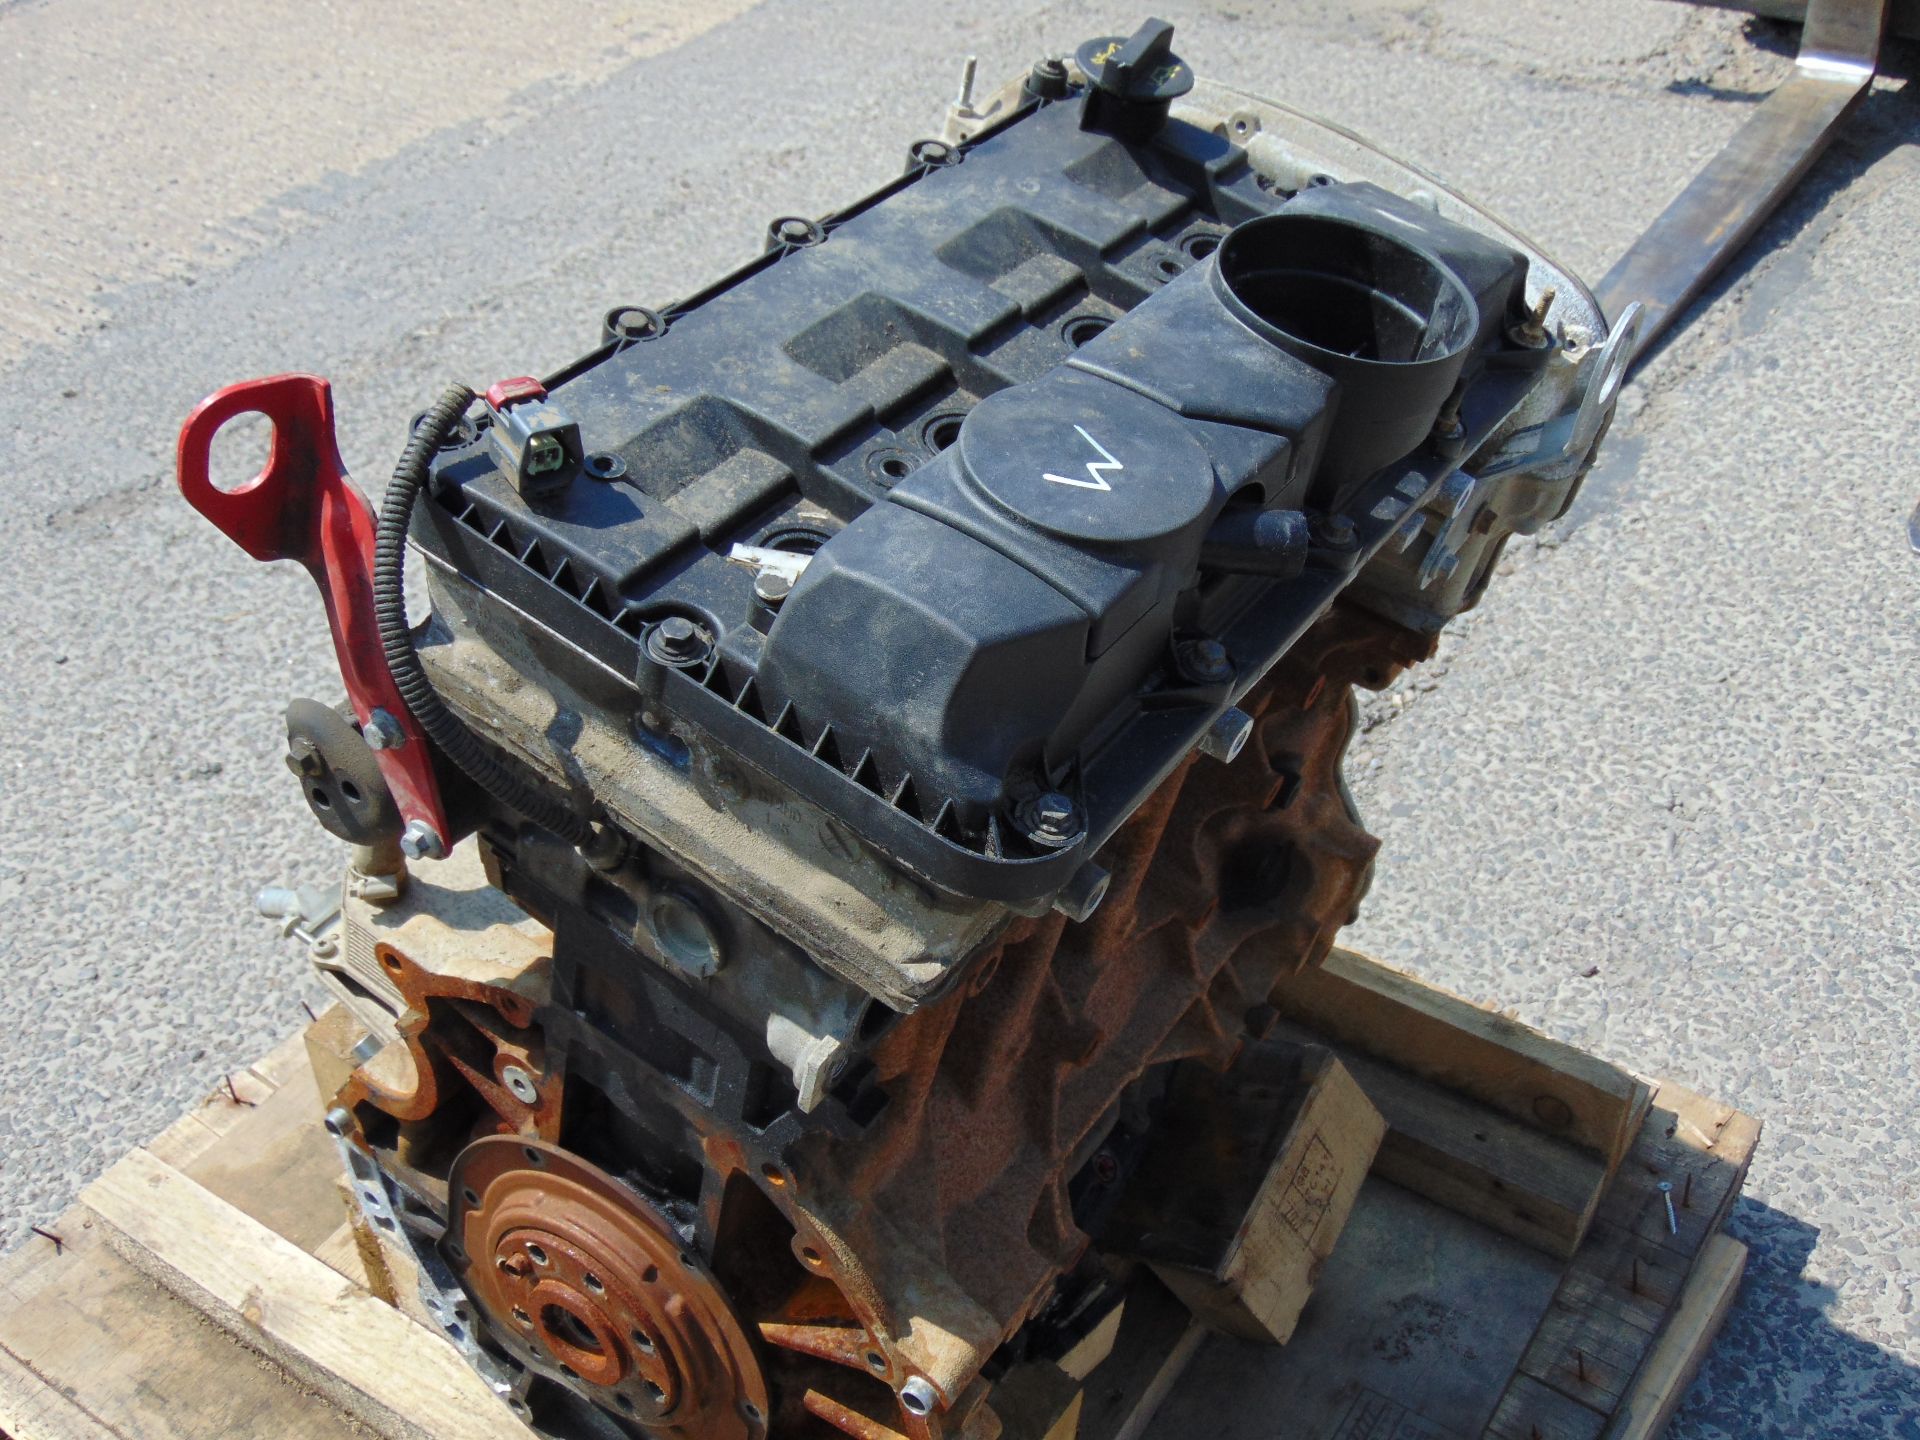 Takeout Land Rover Puma Engine - Image 3 of 6